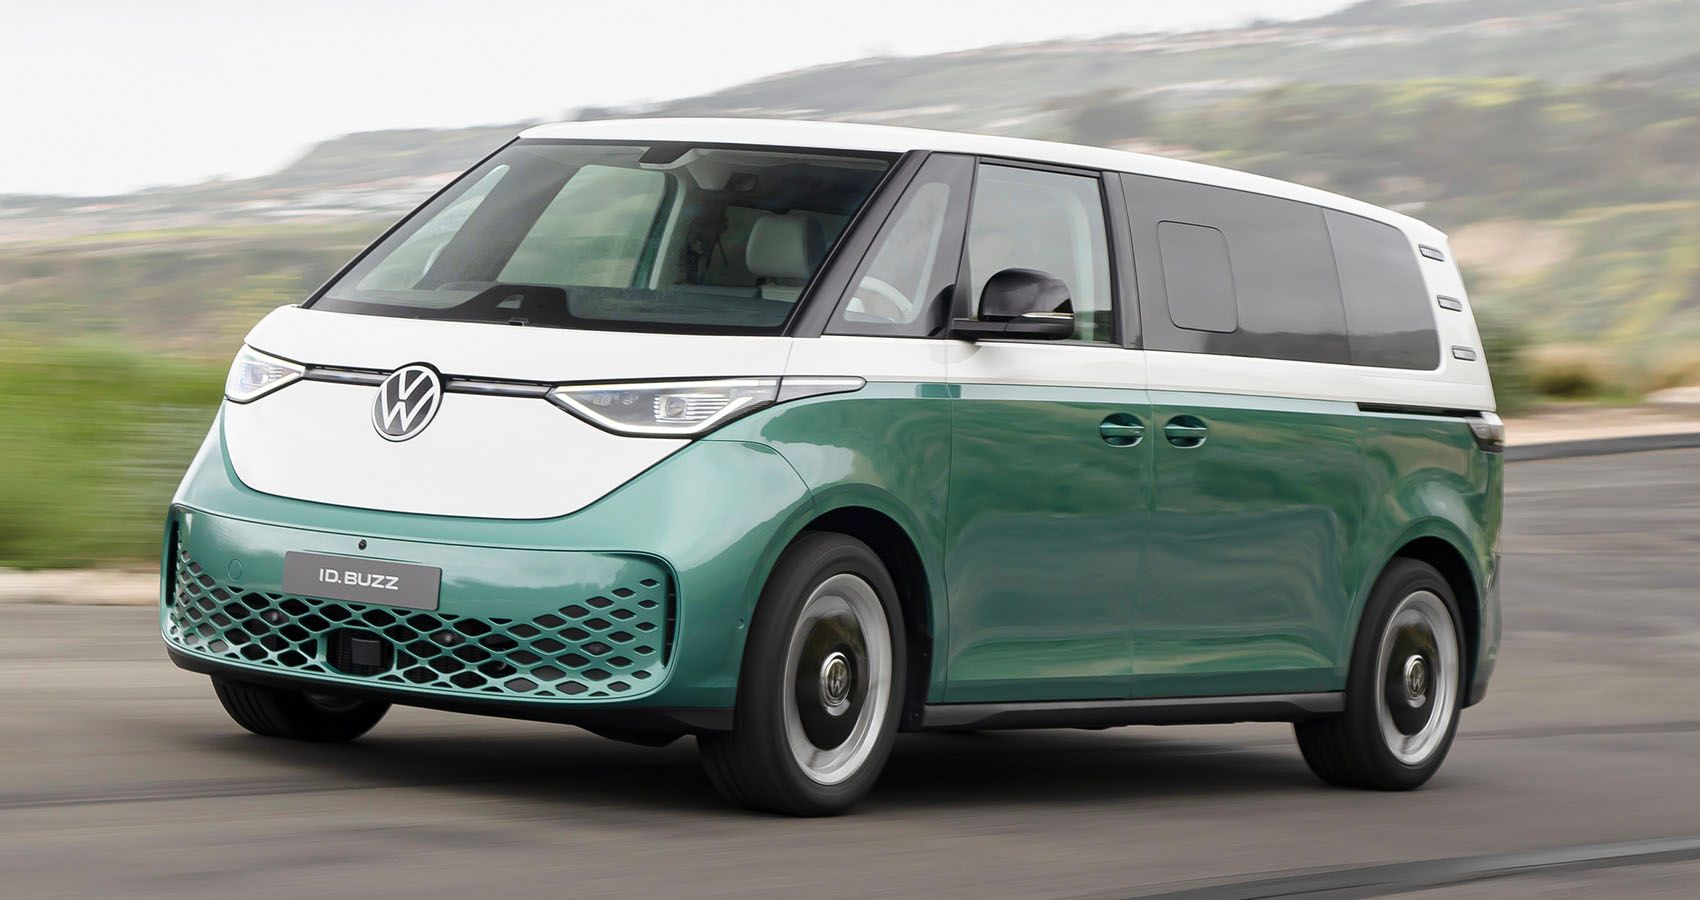 How The 3-Row Volkswagen ID.Buzz Will Make The American Van Life Cool Again